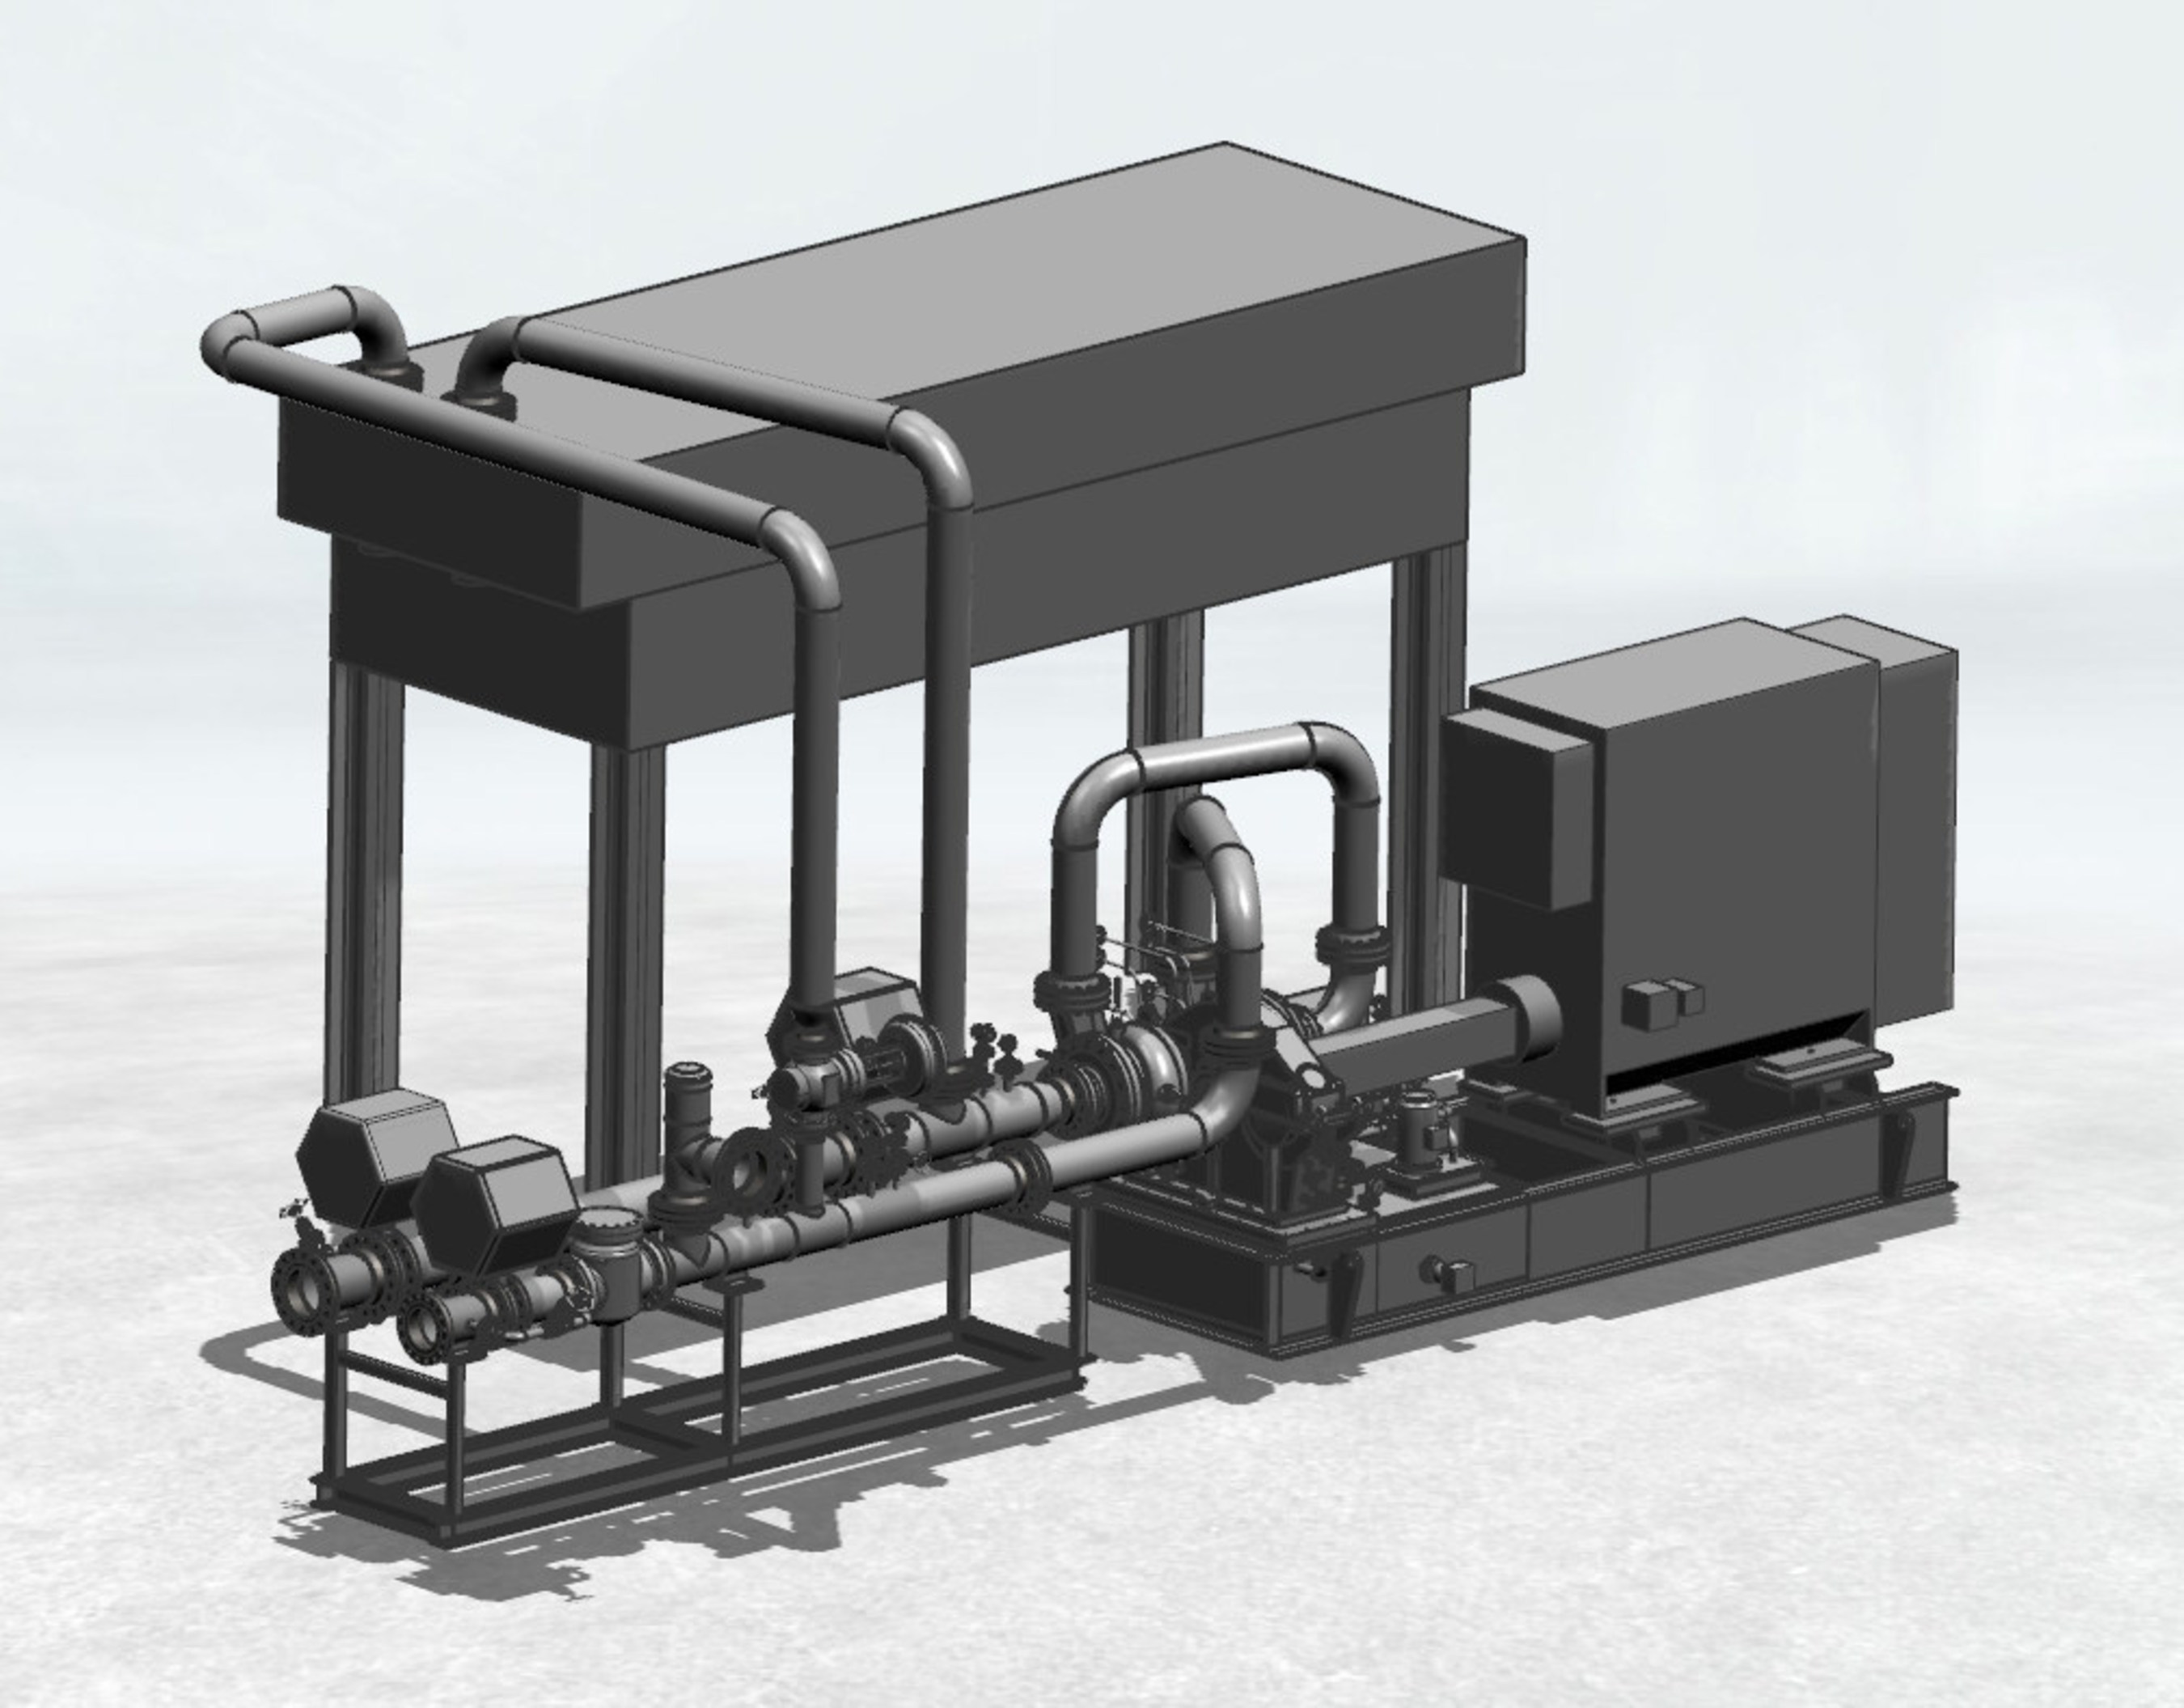 Sundyne literally helped write the book when it comes to API standards for pumps and compressors. While many of our fuel gas compressors are built fit-for-purpose, we still manufacture each unit to meet stringent API 617 standards for compressors in their class. Fit-for-purpose, skid-mounted packages deliver significant benefits, including overall cost-savings, abbreviated delivery times, streamlined installation and commissioning, as well as a compact, space-saving footprint.